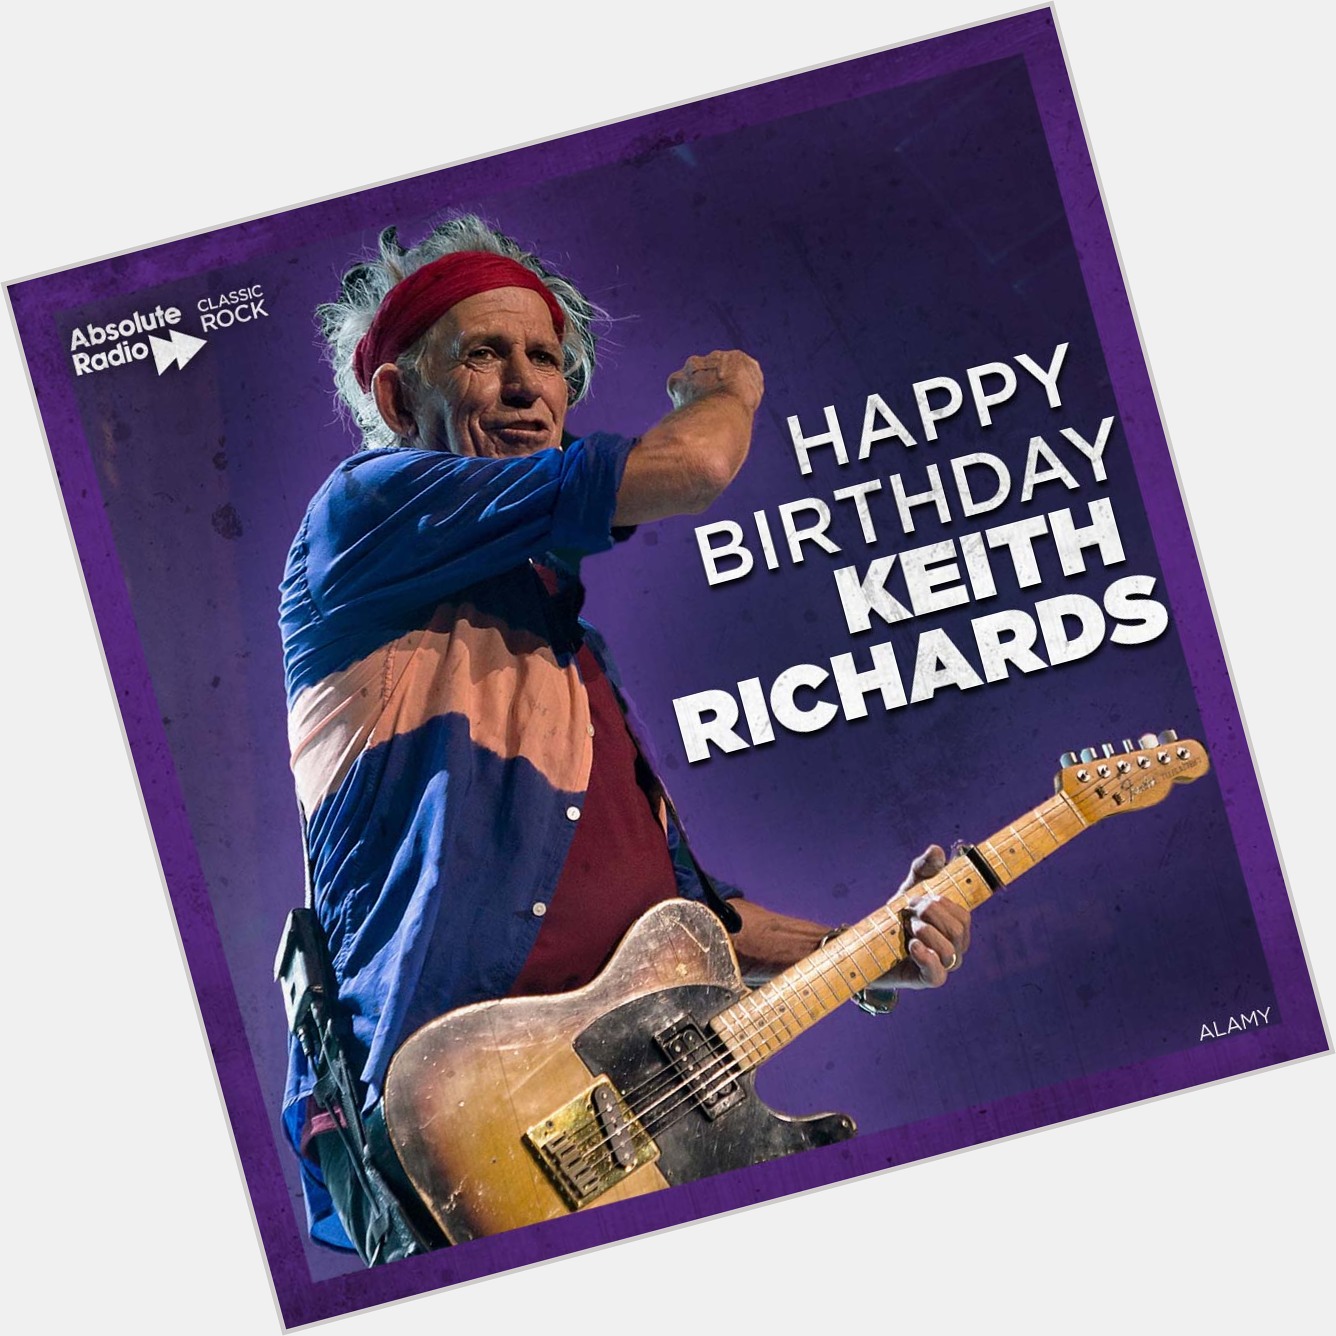 Still going! Legend.

Happy birthday to The Keith Richards! 